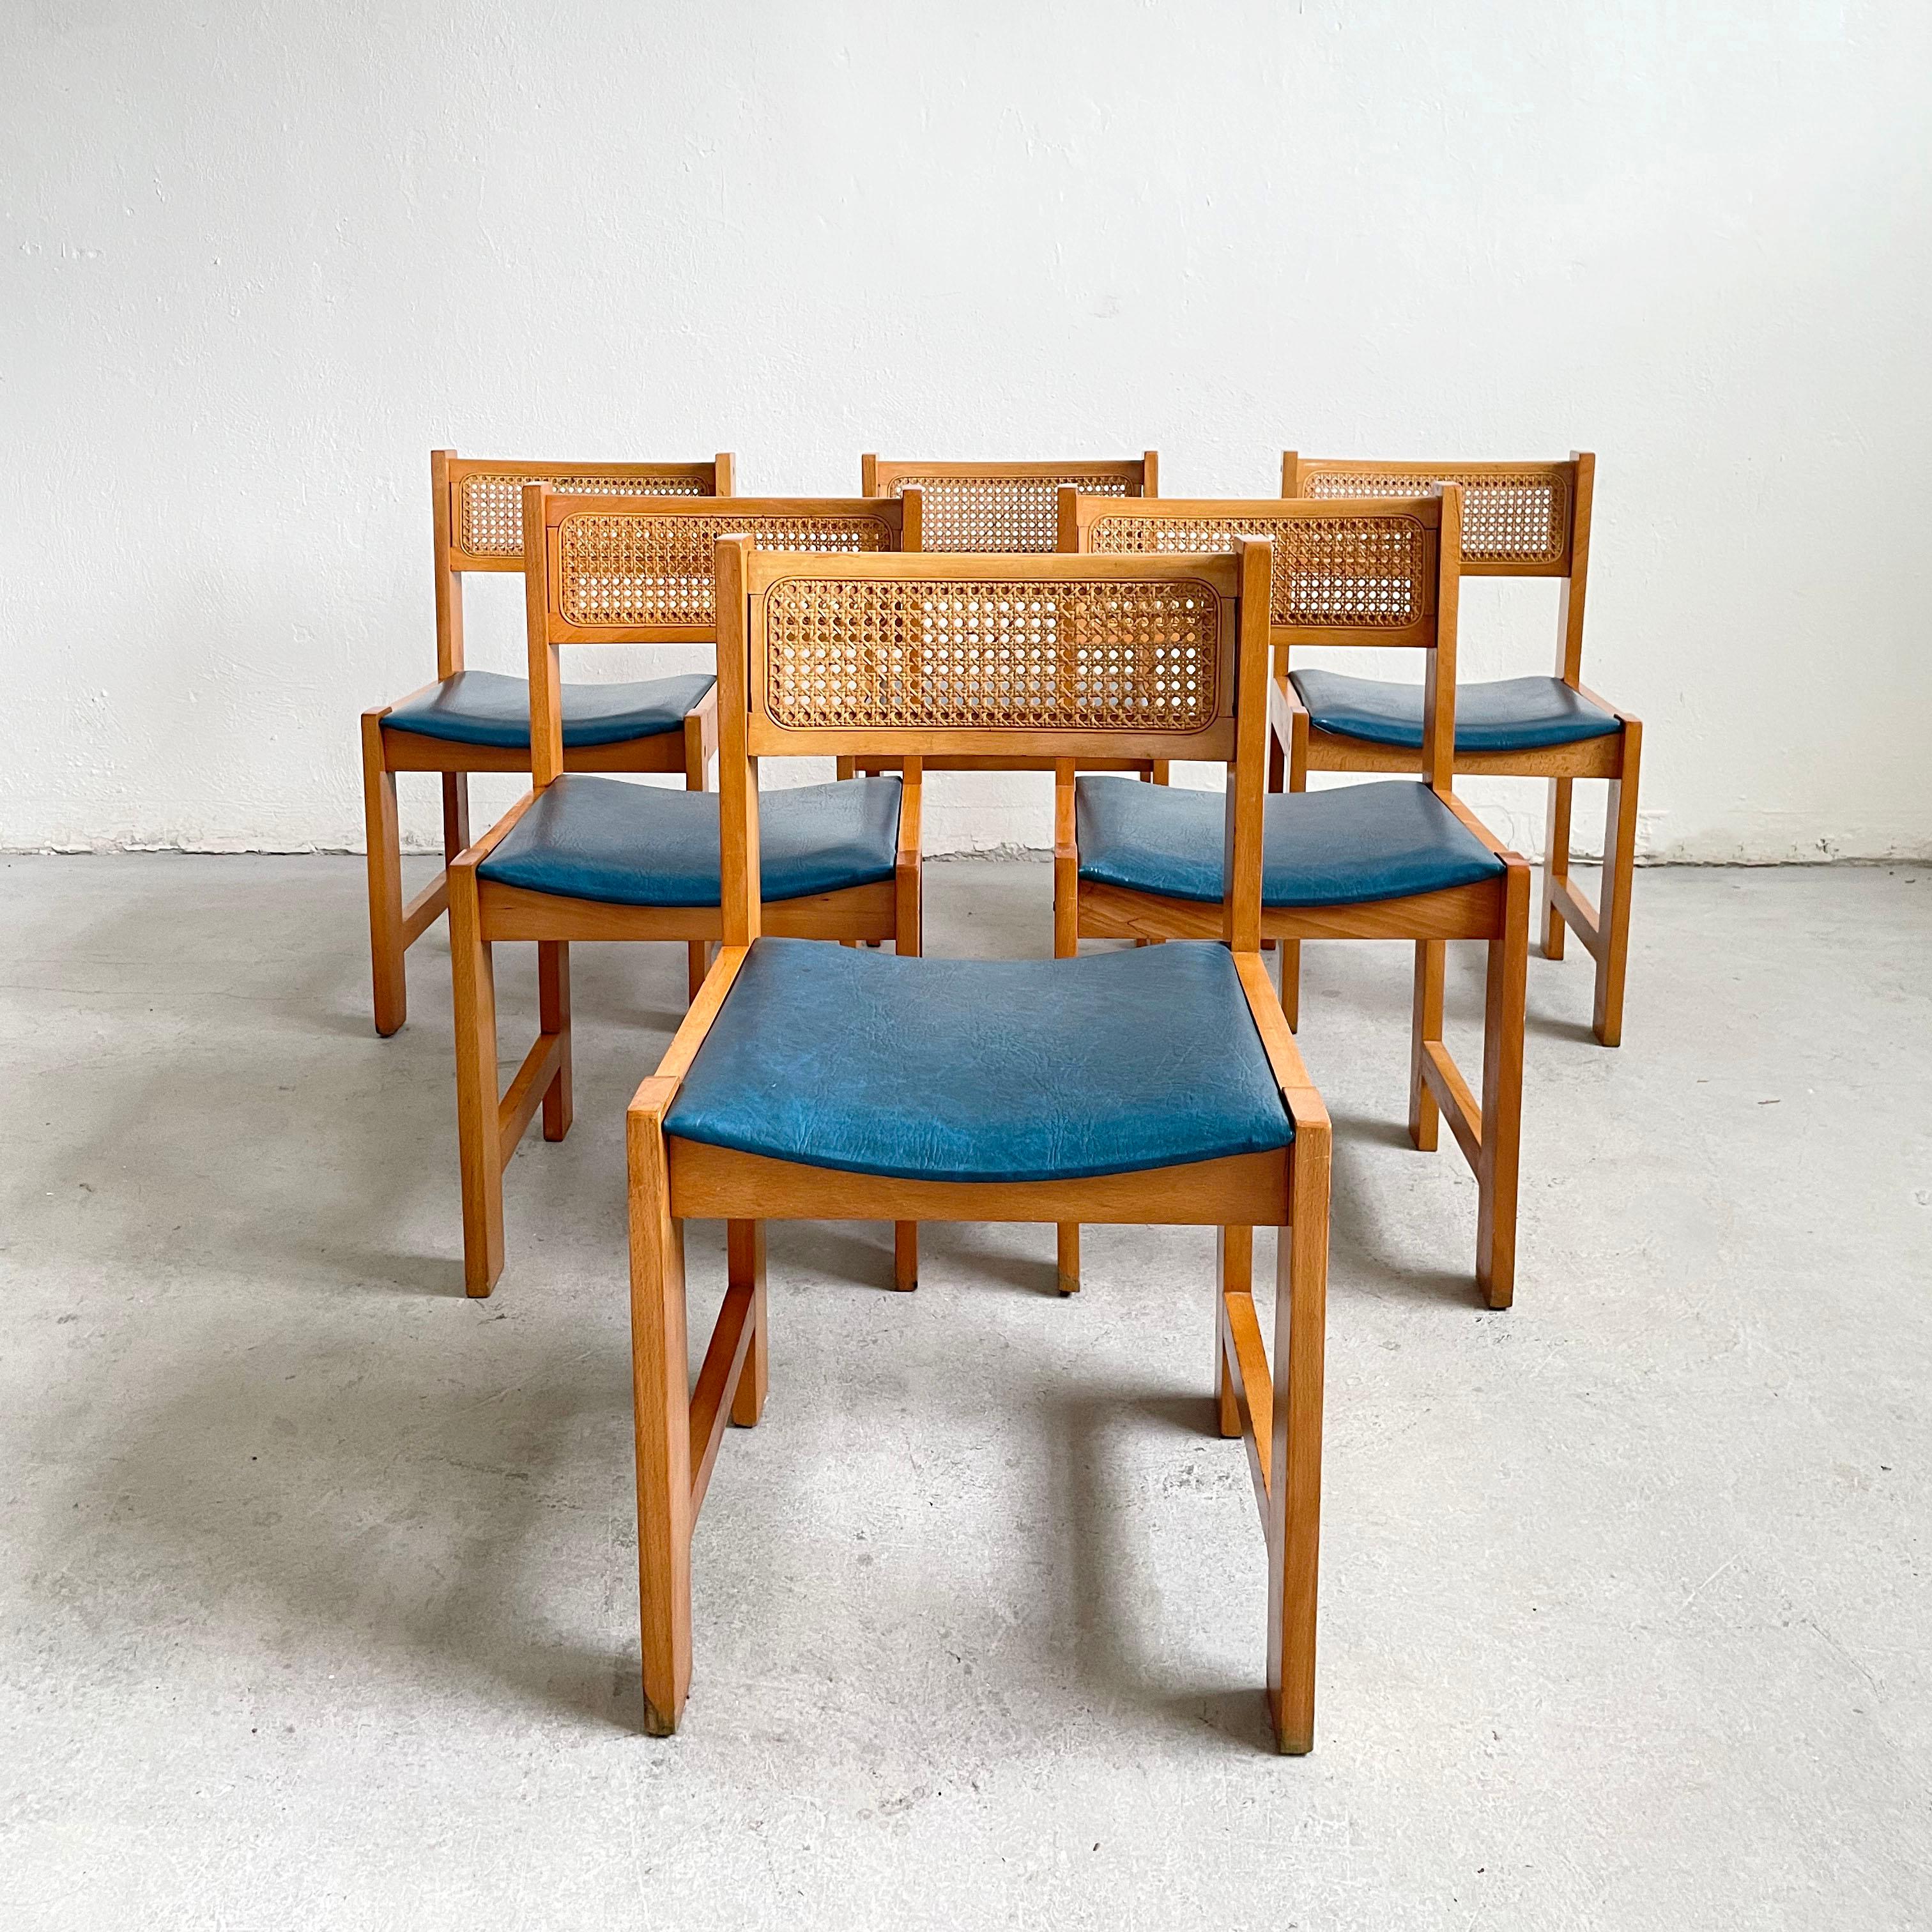 20th Century Set of 6 Mid-Century Cane Rattan and Vinyl Wooden Dining Chairs, 1960s 1970s